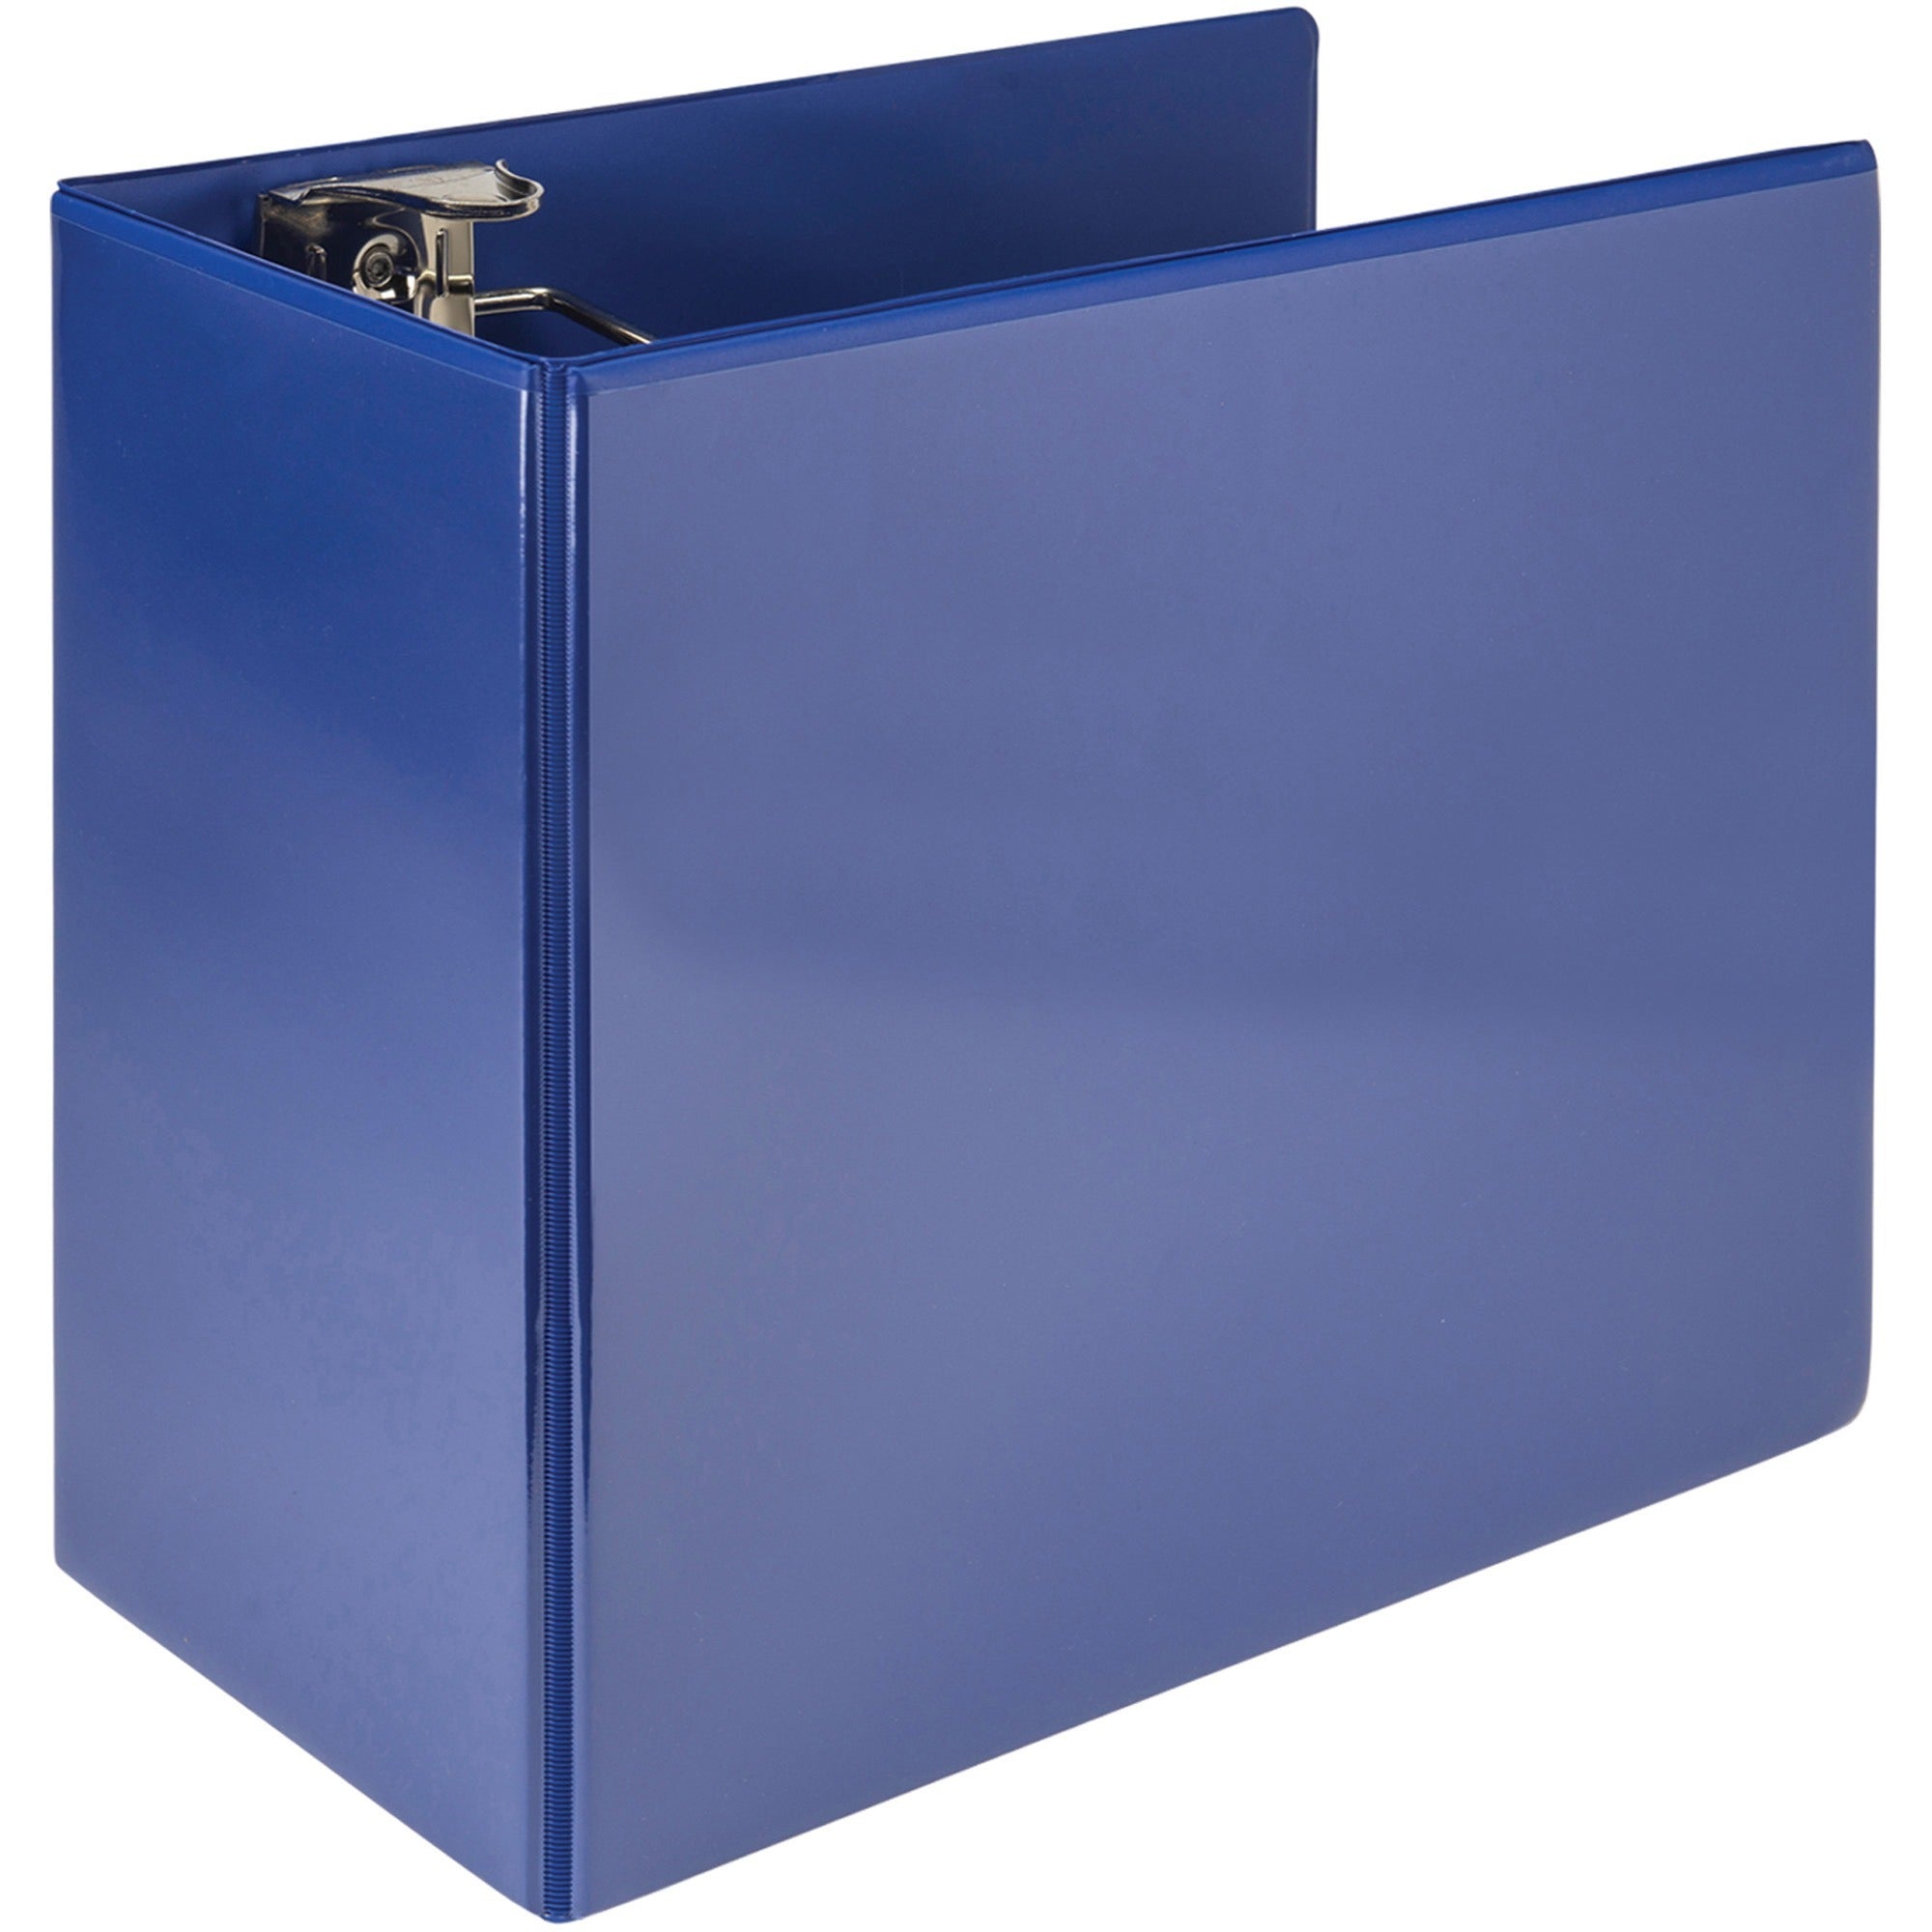 samsill-nonstick-6-locking-d-ring-view-binder-6-binder-capacity-1225-sheet-capacity-3-x-d-ring-fasteners-2-internal-pockets-dark-blue-273-lb-recycled-lockable-non-stick-concealed-rivet-ink-transfer-resistant-clear-overlay_sam16422 - 1